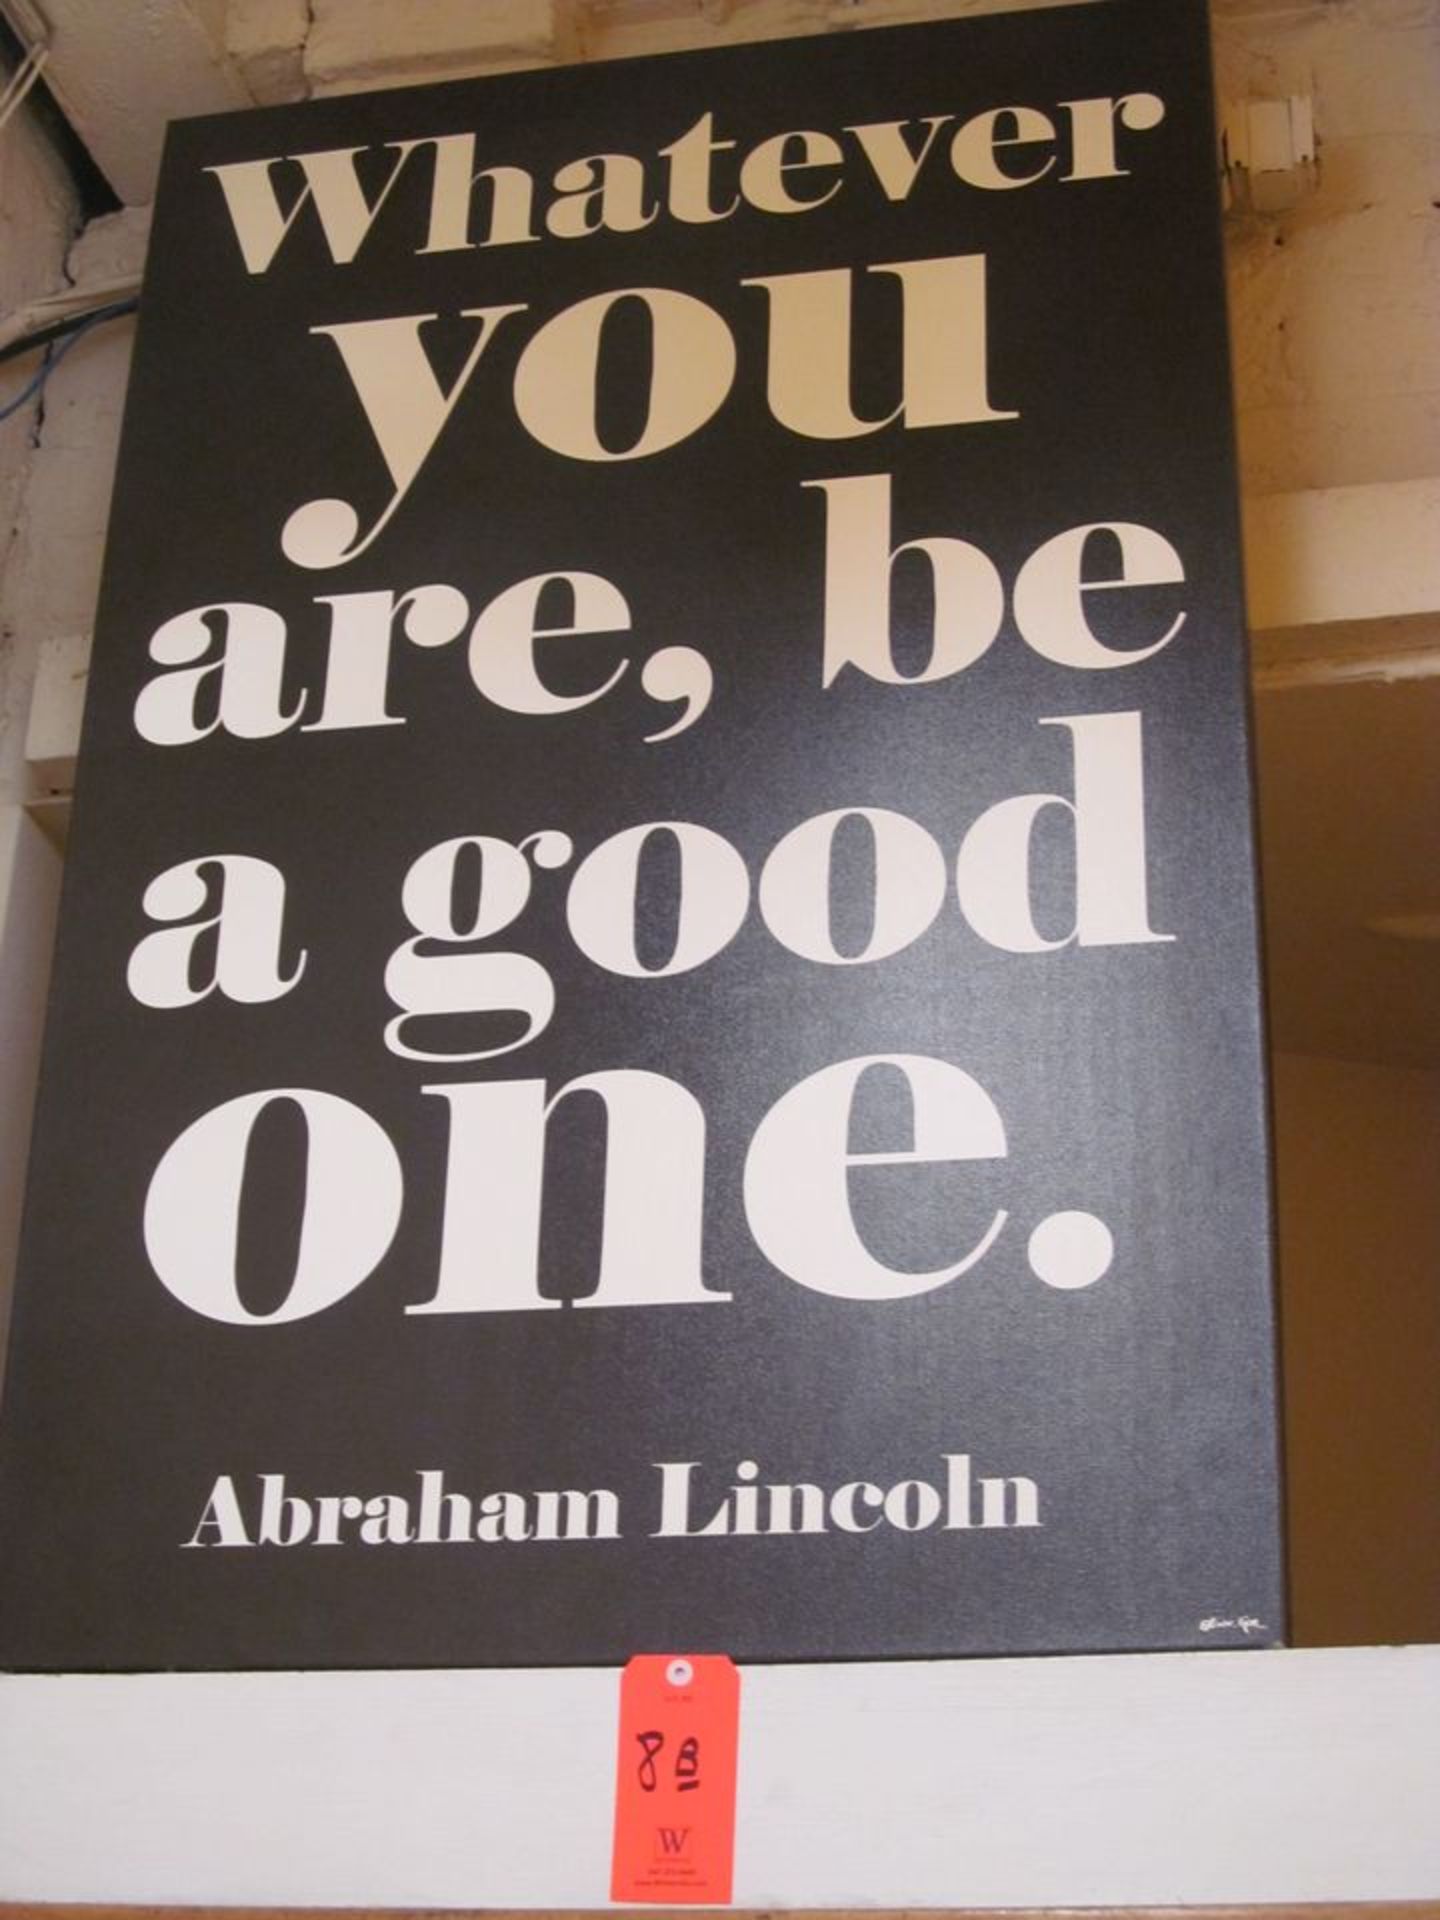 Sign with Quote from Abraham Lincoln, "Whatever You Are, Be A Good One"